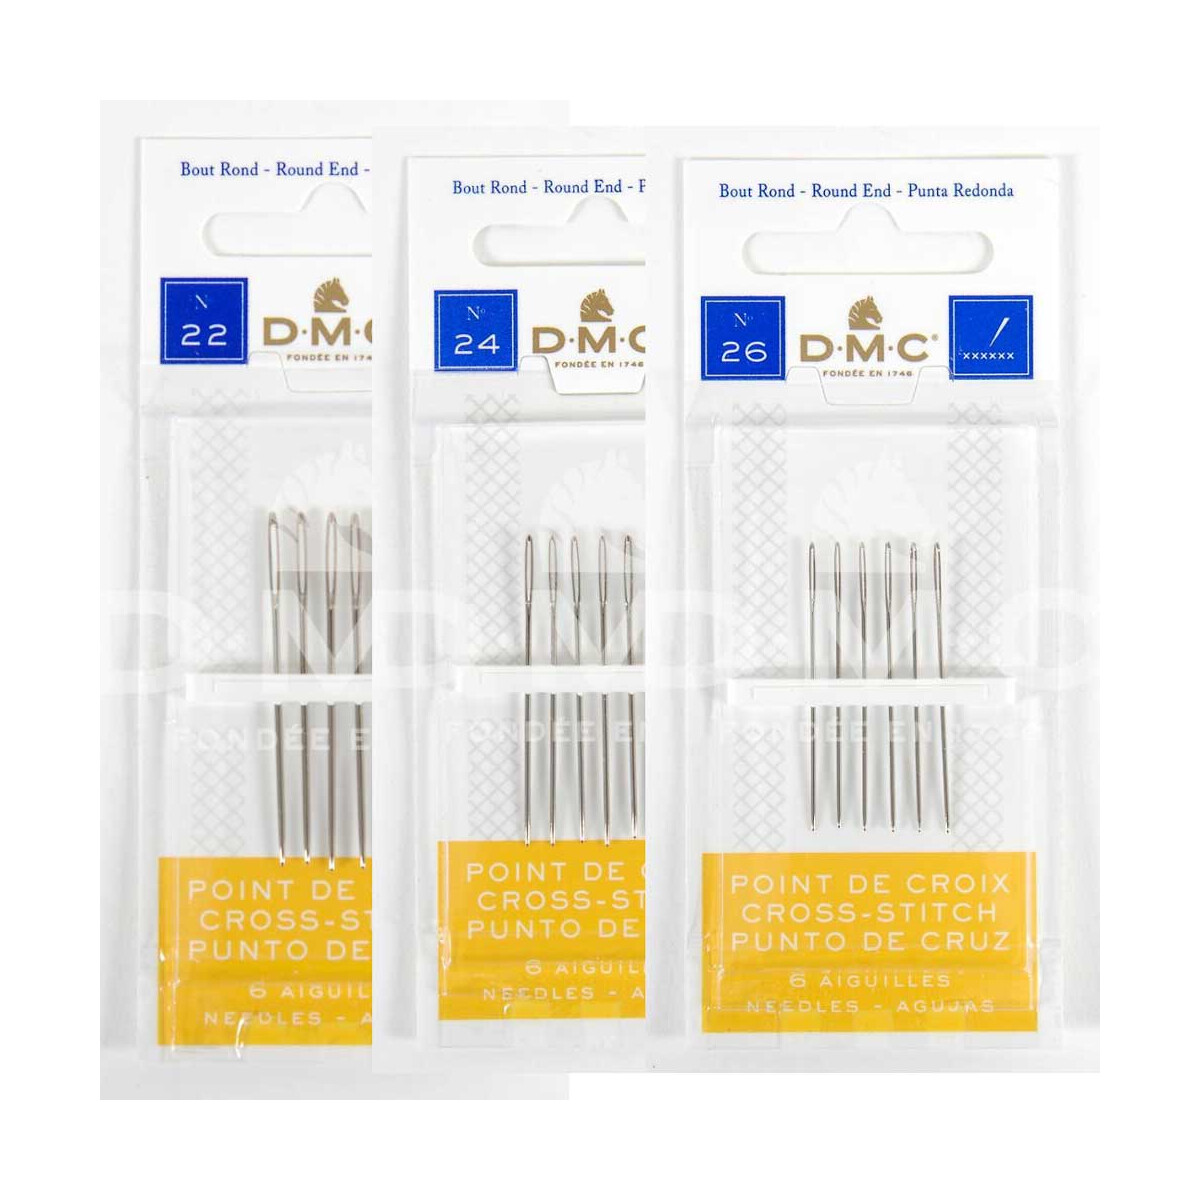 DMC Stitch Needle for cross stitch, rounded end,...